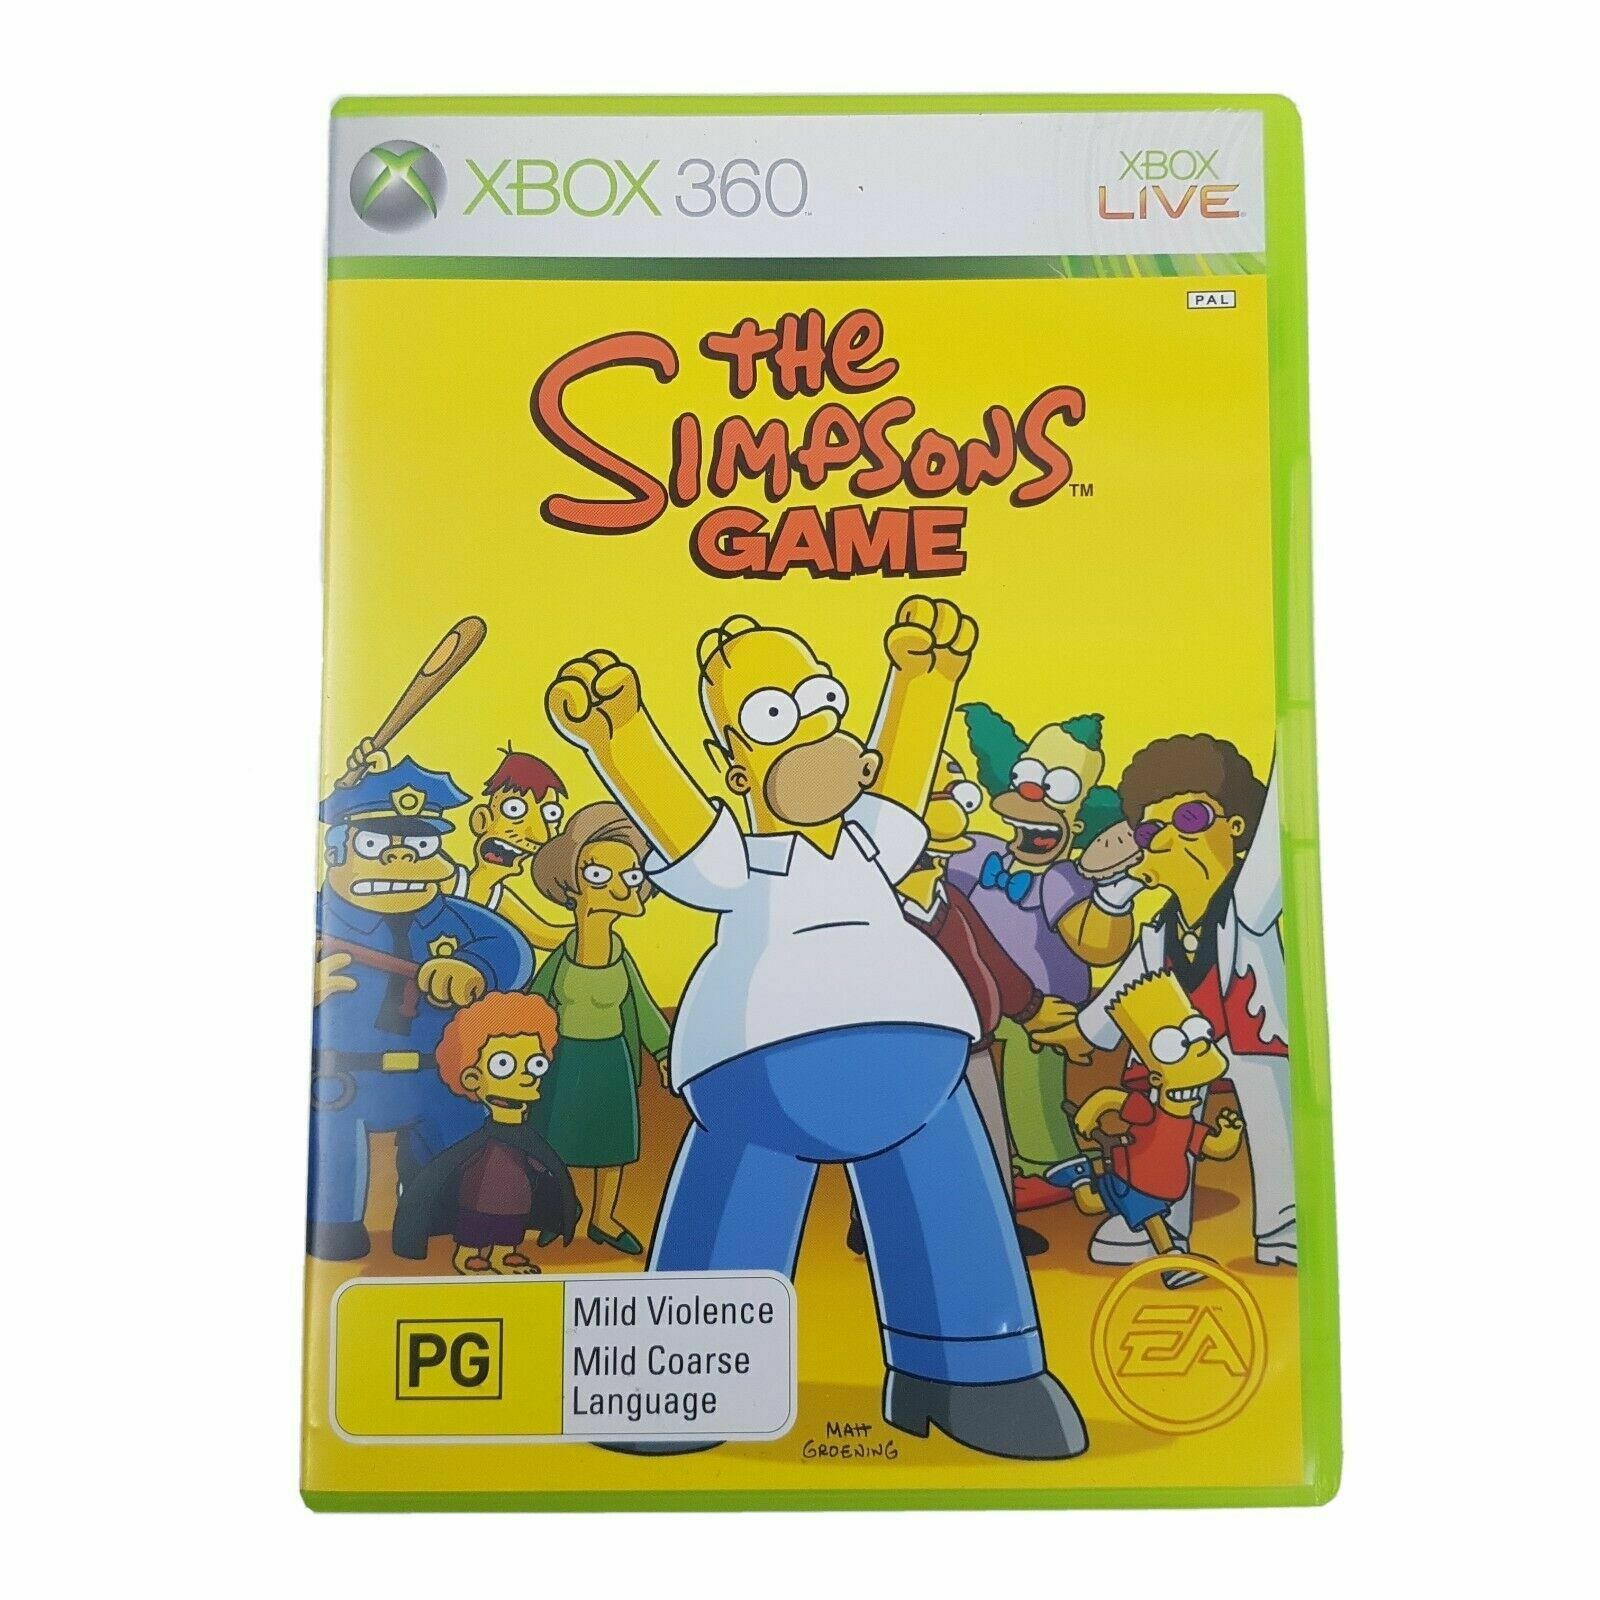 simpsons hit and run xbox 360